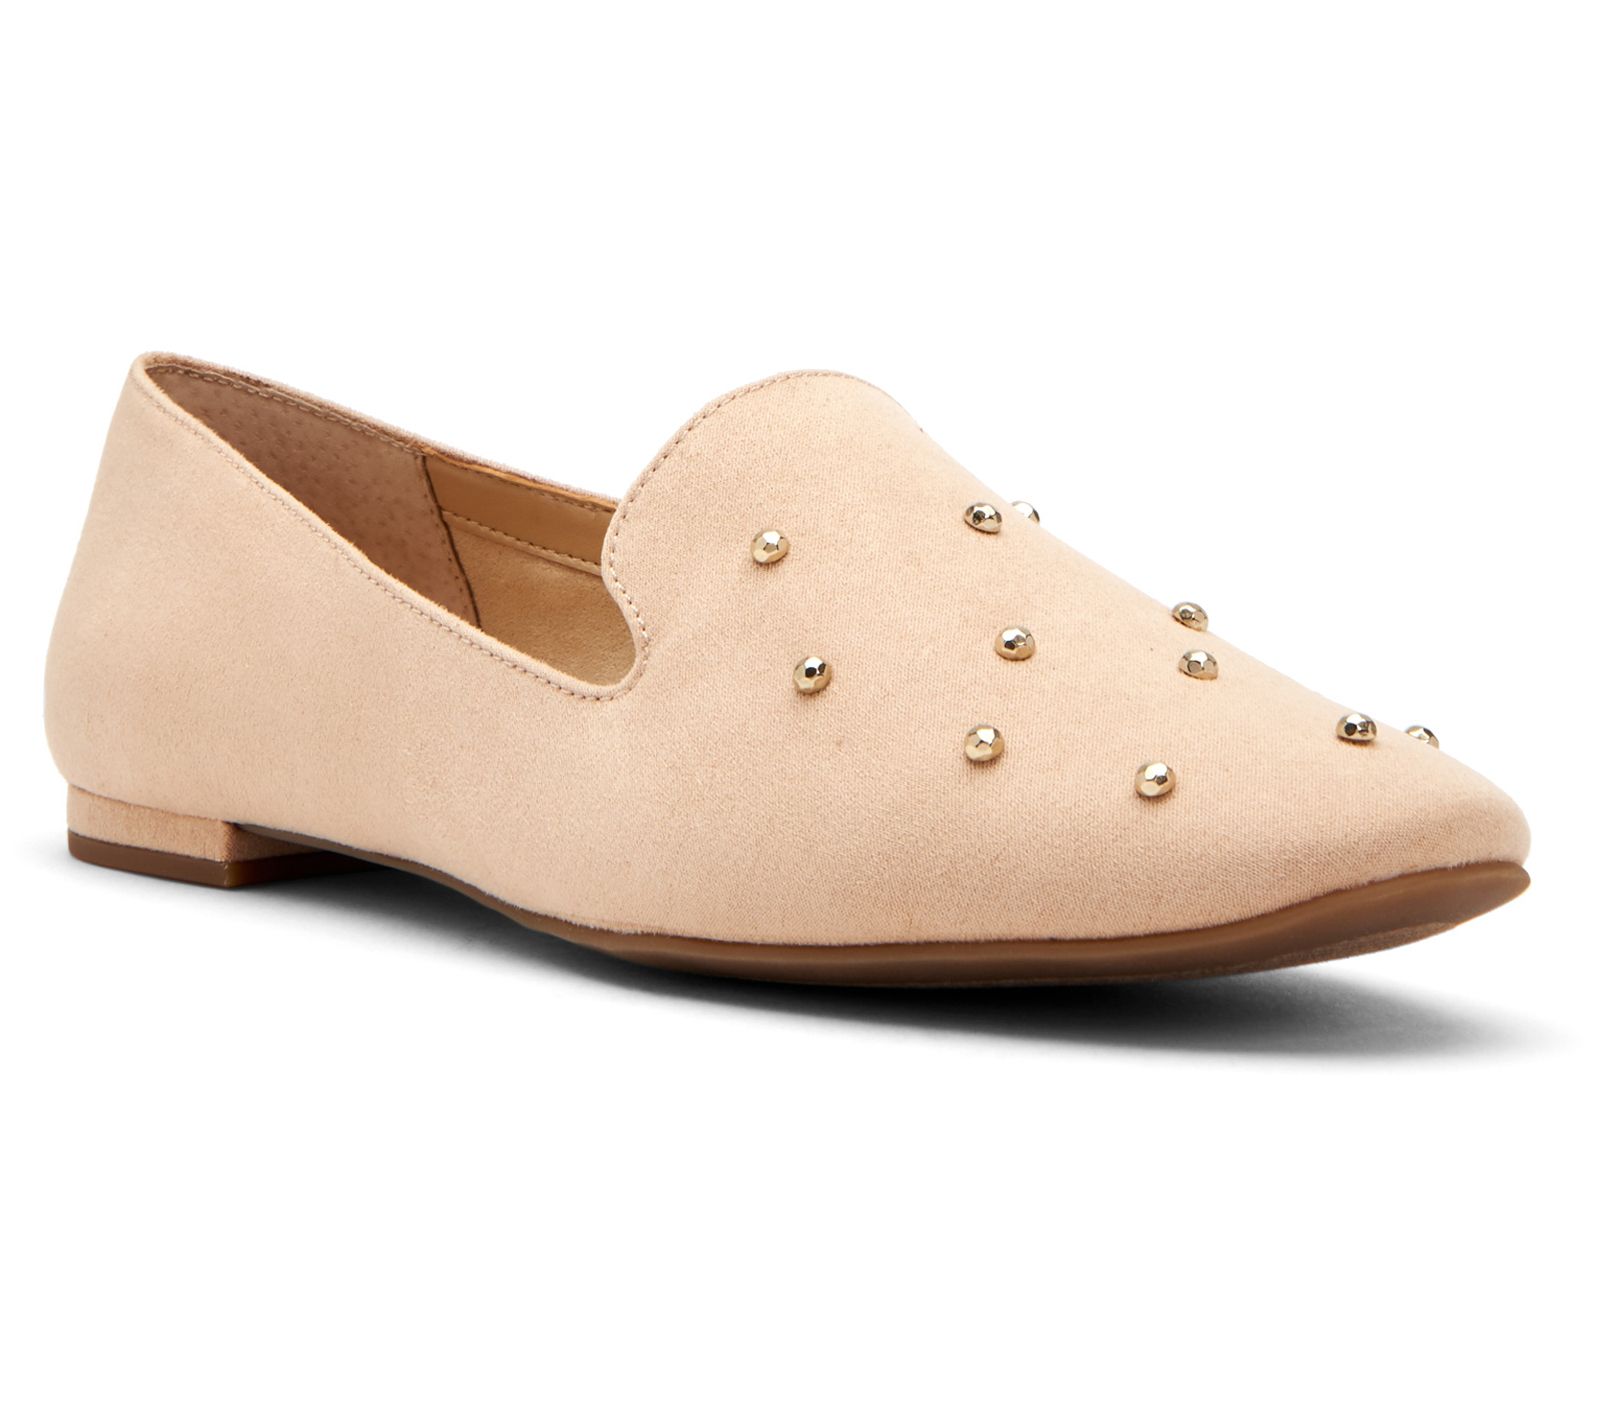 Katy Perry Embellished Loafers - The Allena QVC.com